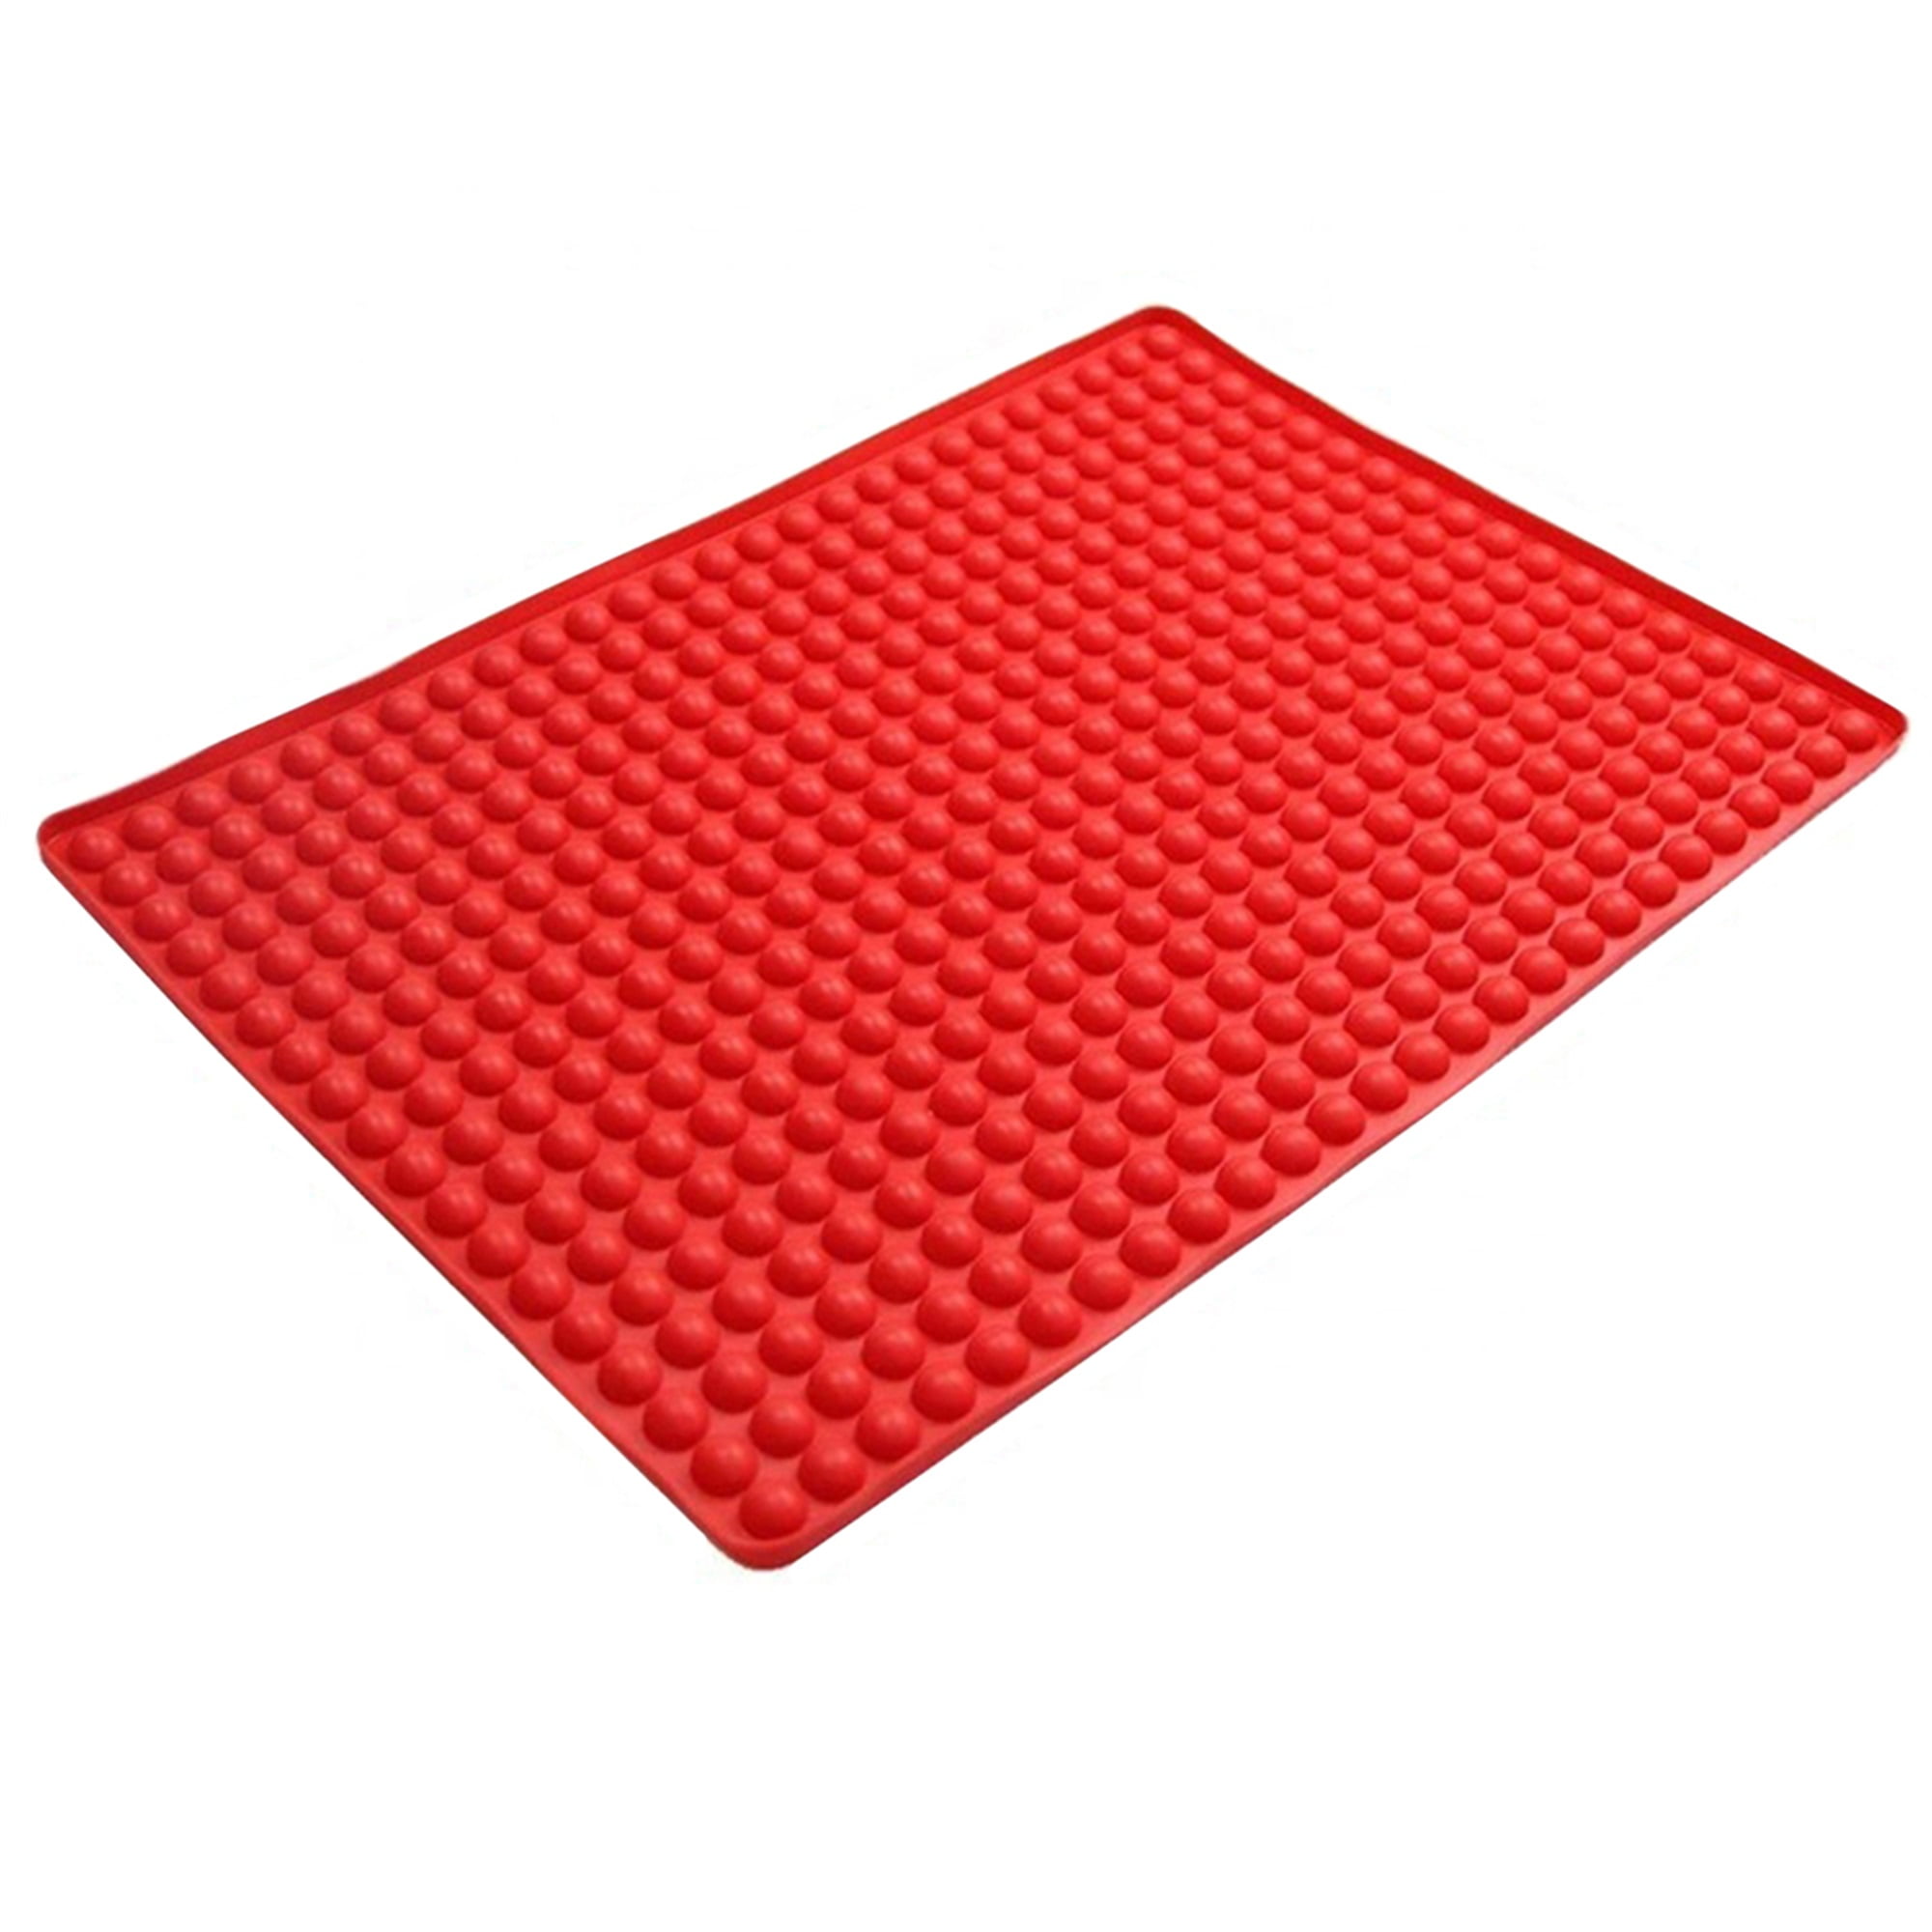 Libertroy Thin Safe Food-Grade Silicone Sheets Mat Mould Cooking Oven Baking Tray Non Stick Silicone Baking Mat Kitchen Tools Red 